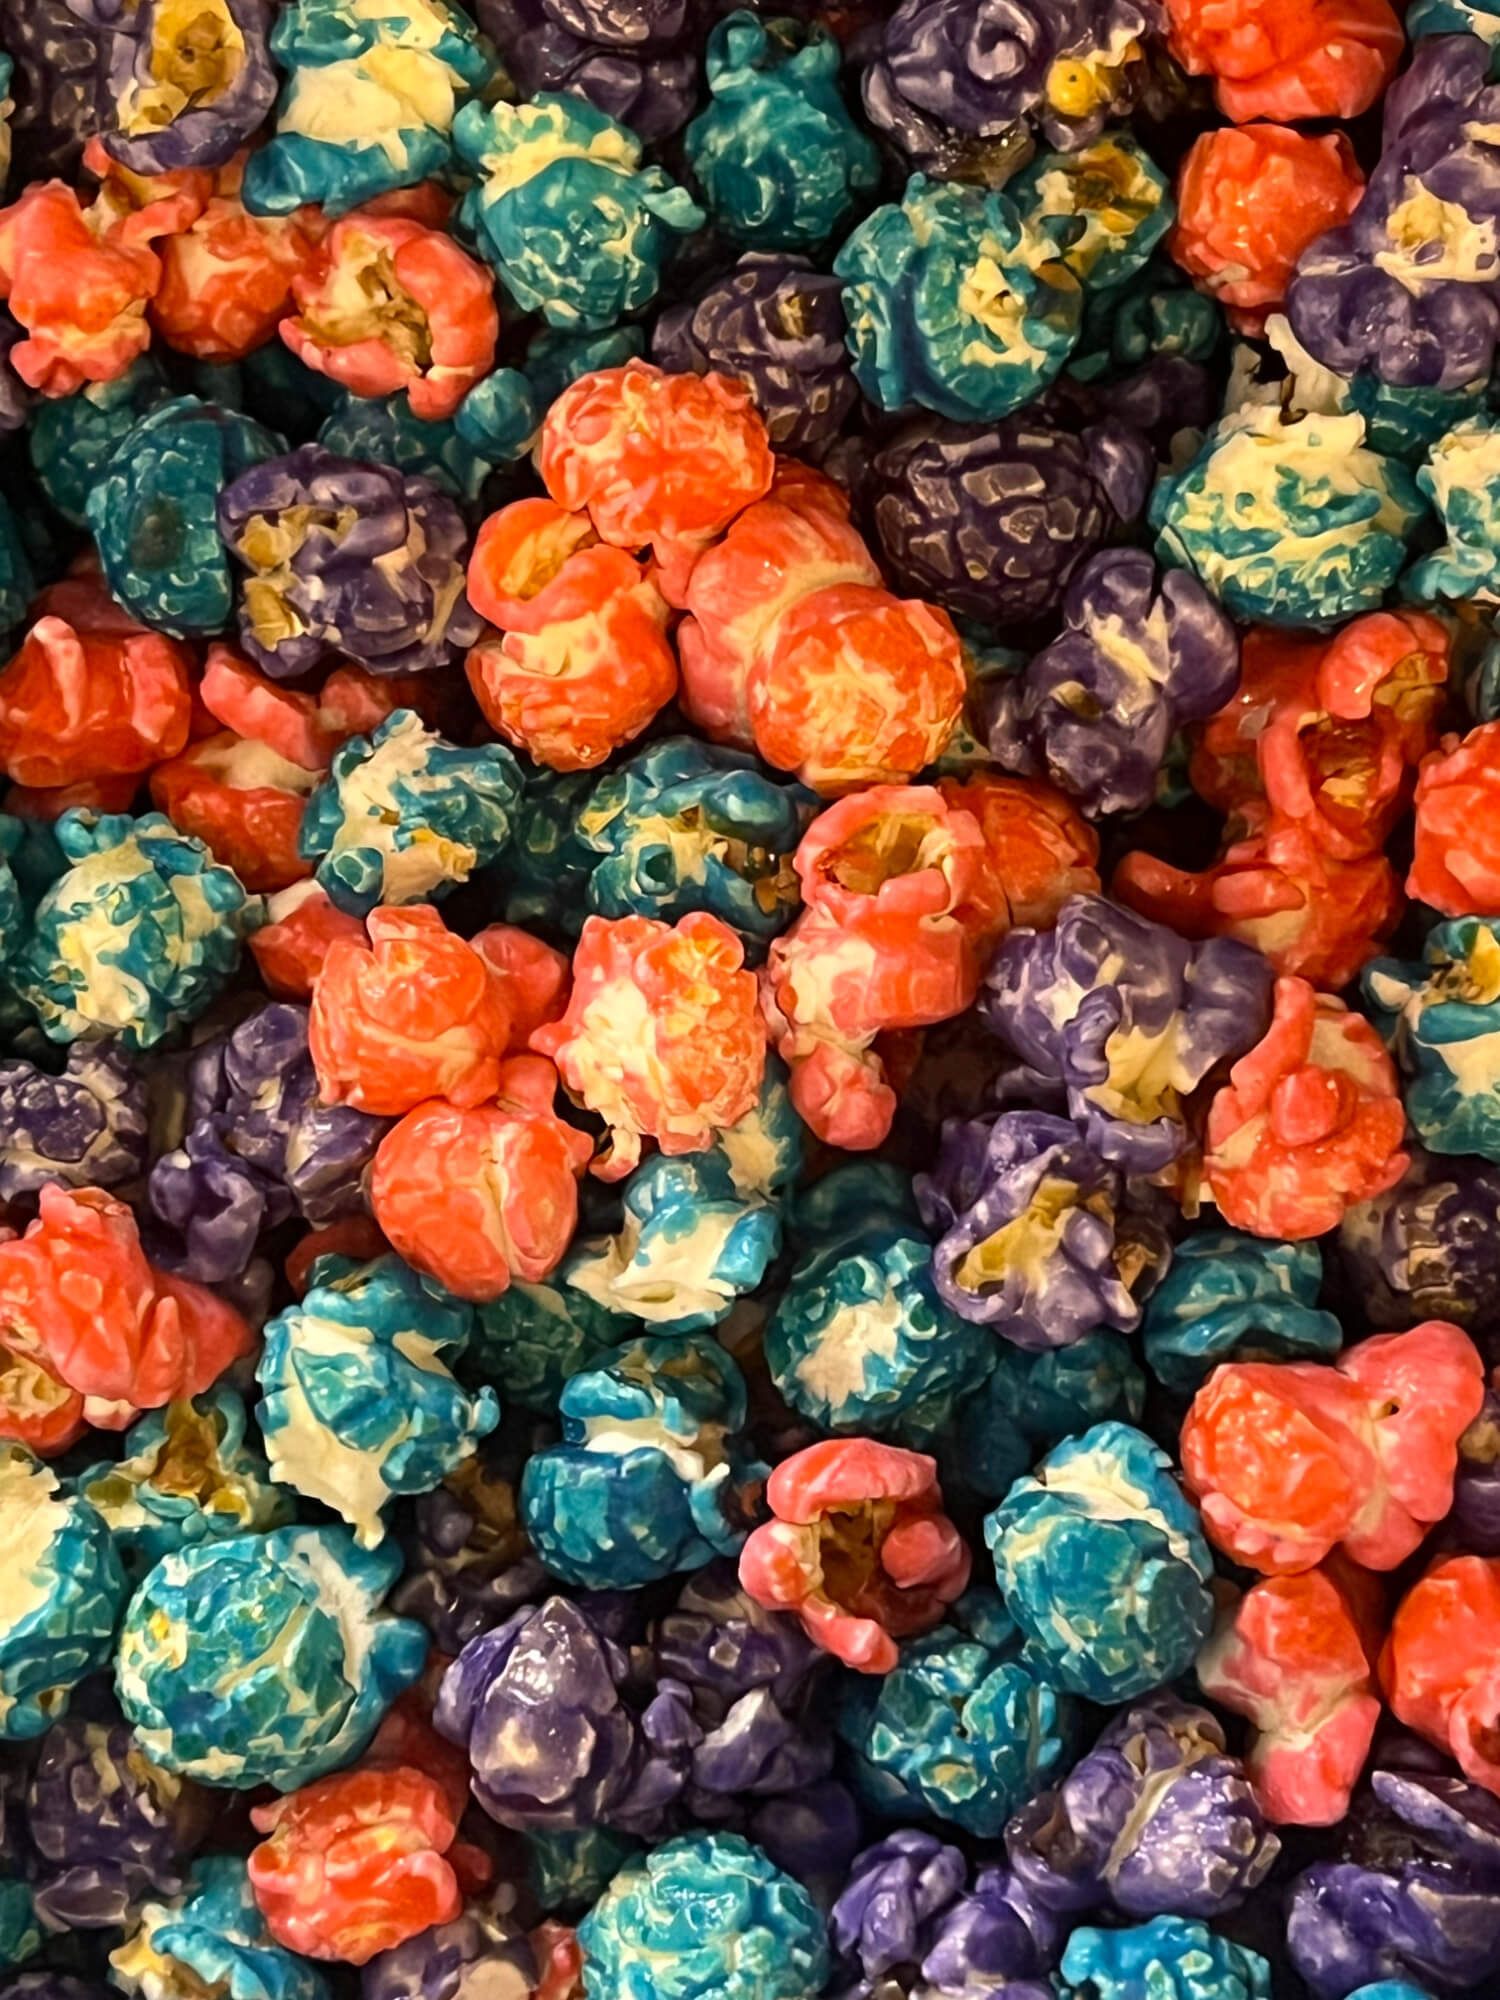 A close up of a pile of colorful popcorn